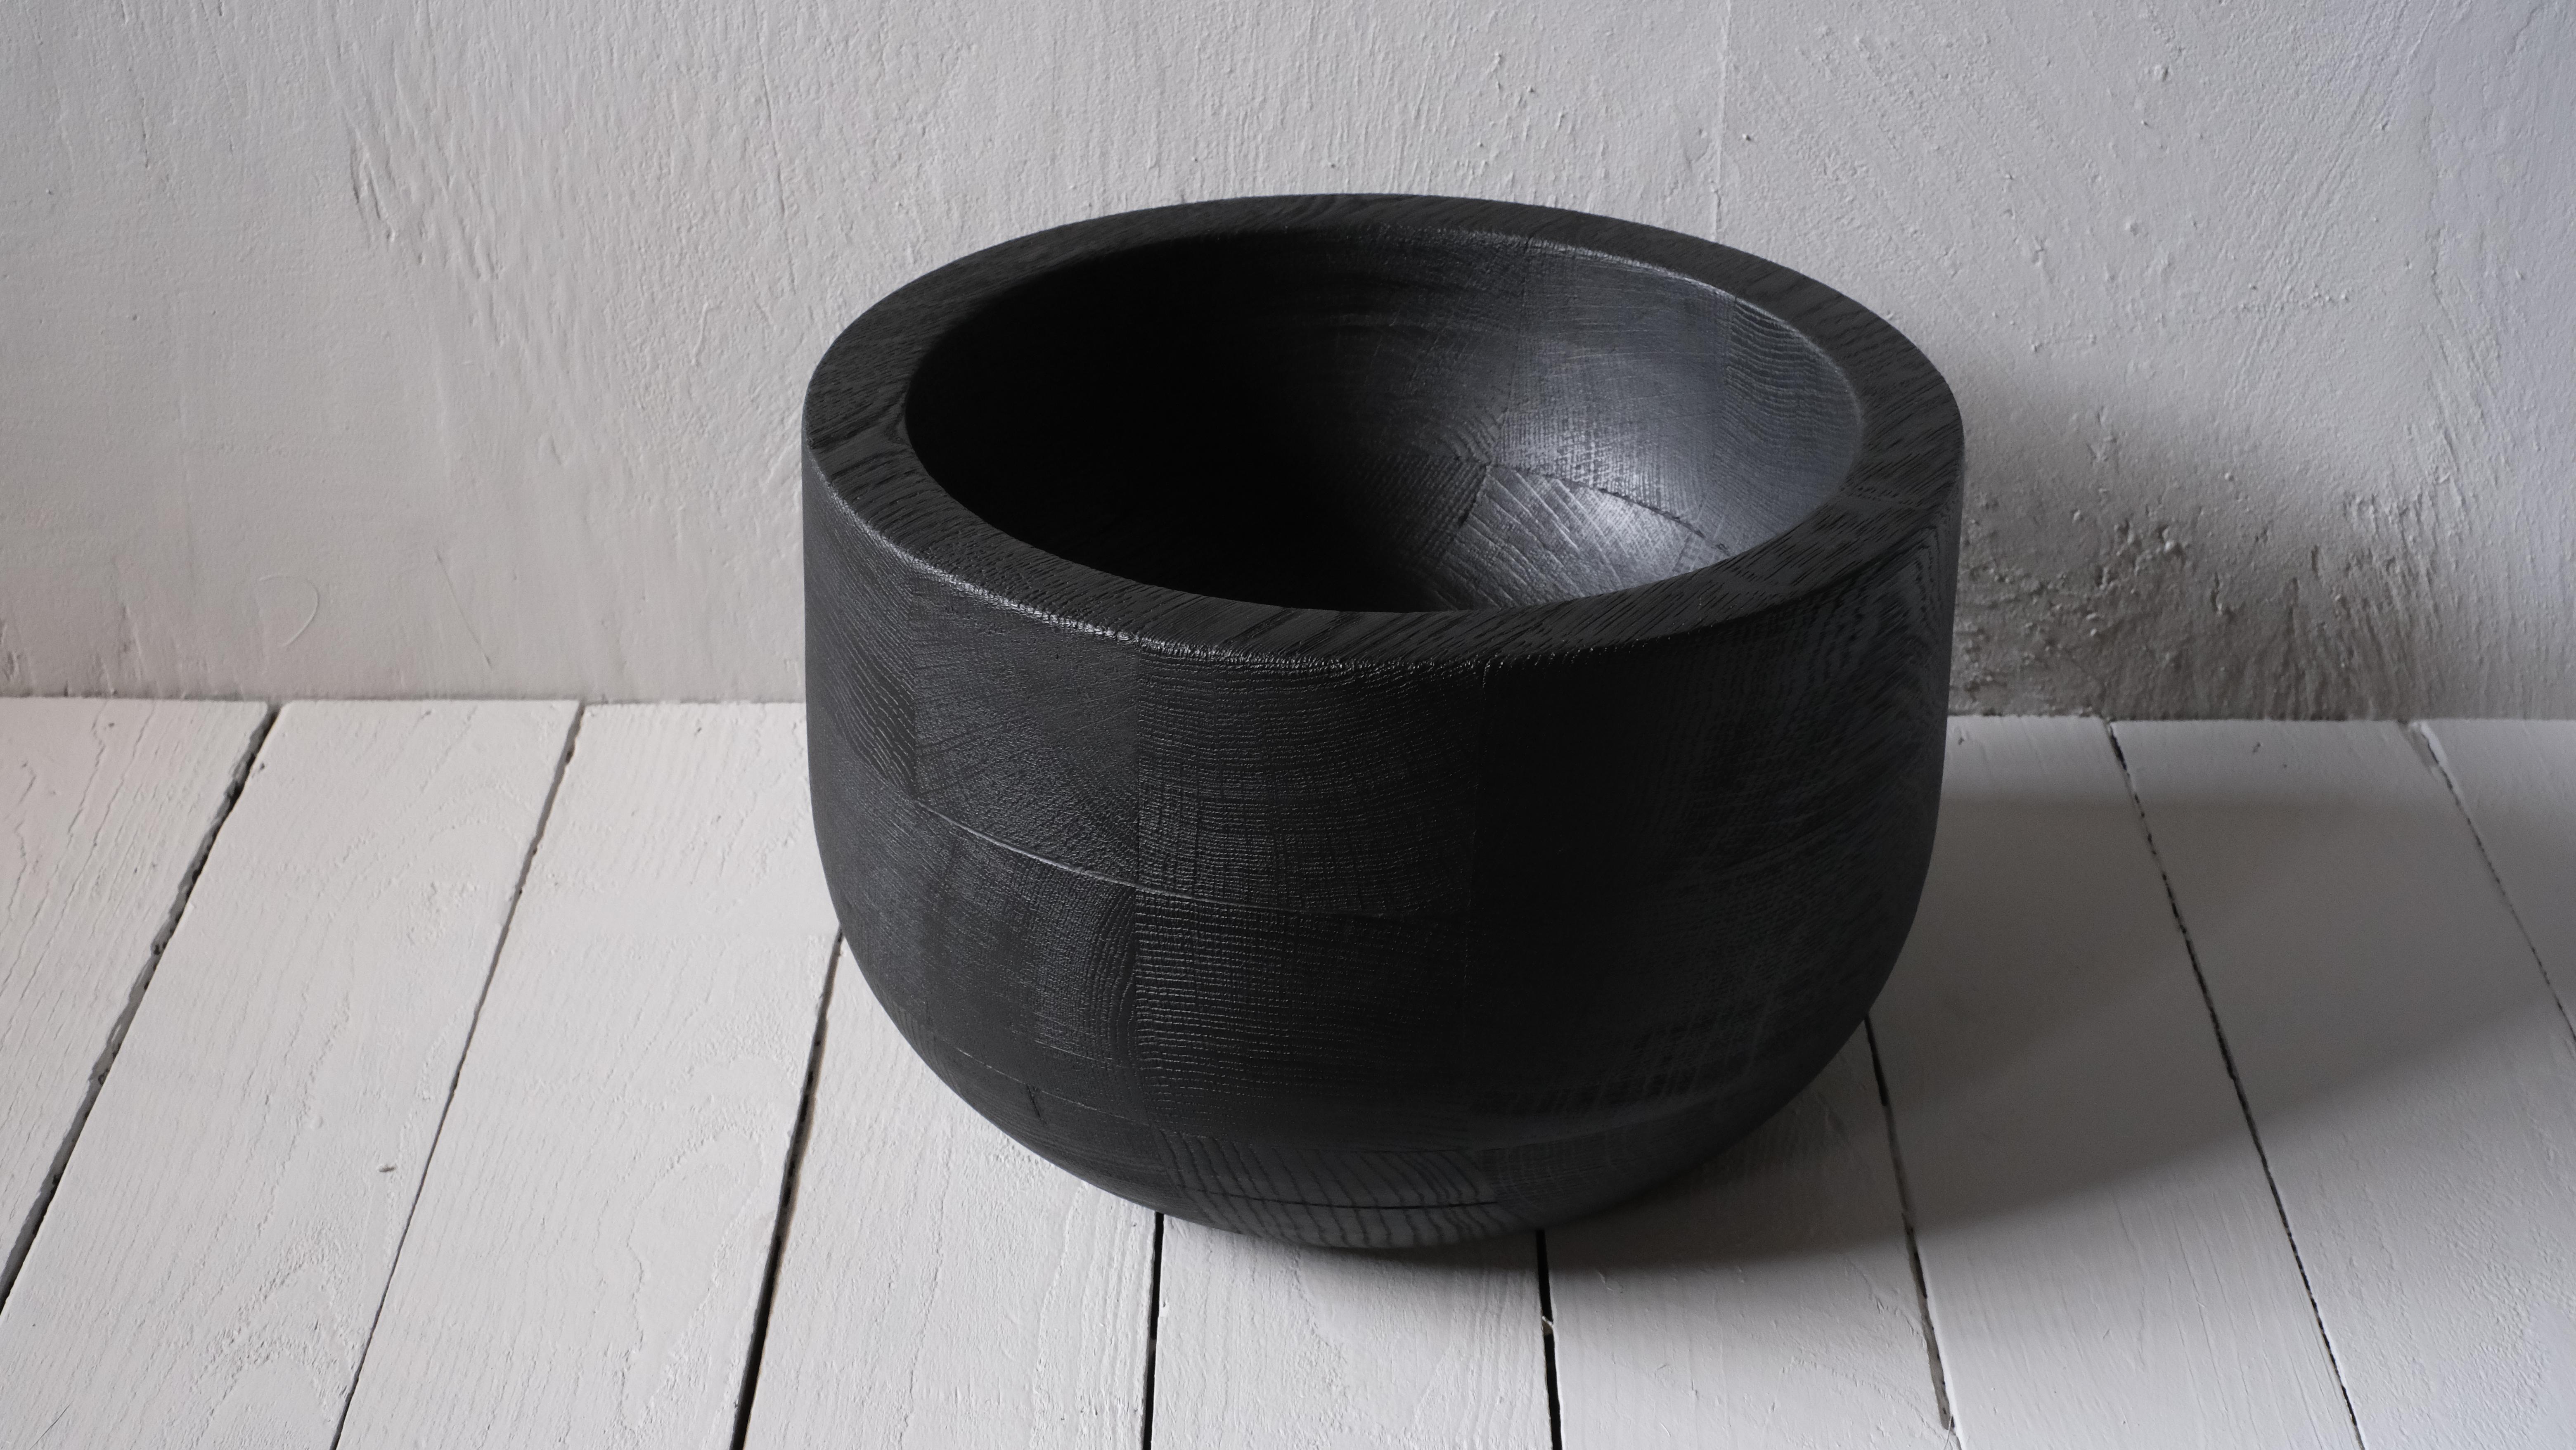 Zulu Bowl by Arno Declercq
Dimensions: D 30 x W 30 x H 20 cm. 
Materials: burned and waxed oak.

Arno Declercq
Belgian designer and art dealer who makes bespoke objects with passion for design, atmosphere, history and craft. Arno grew up in a family